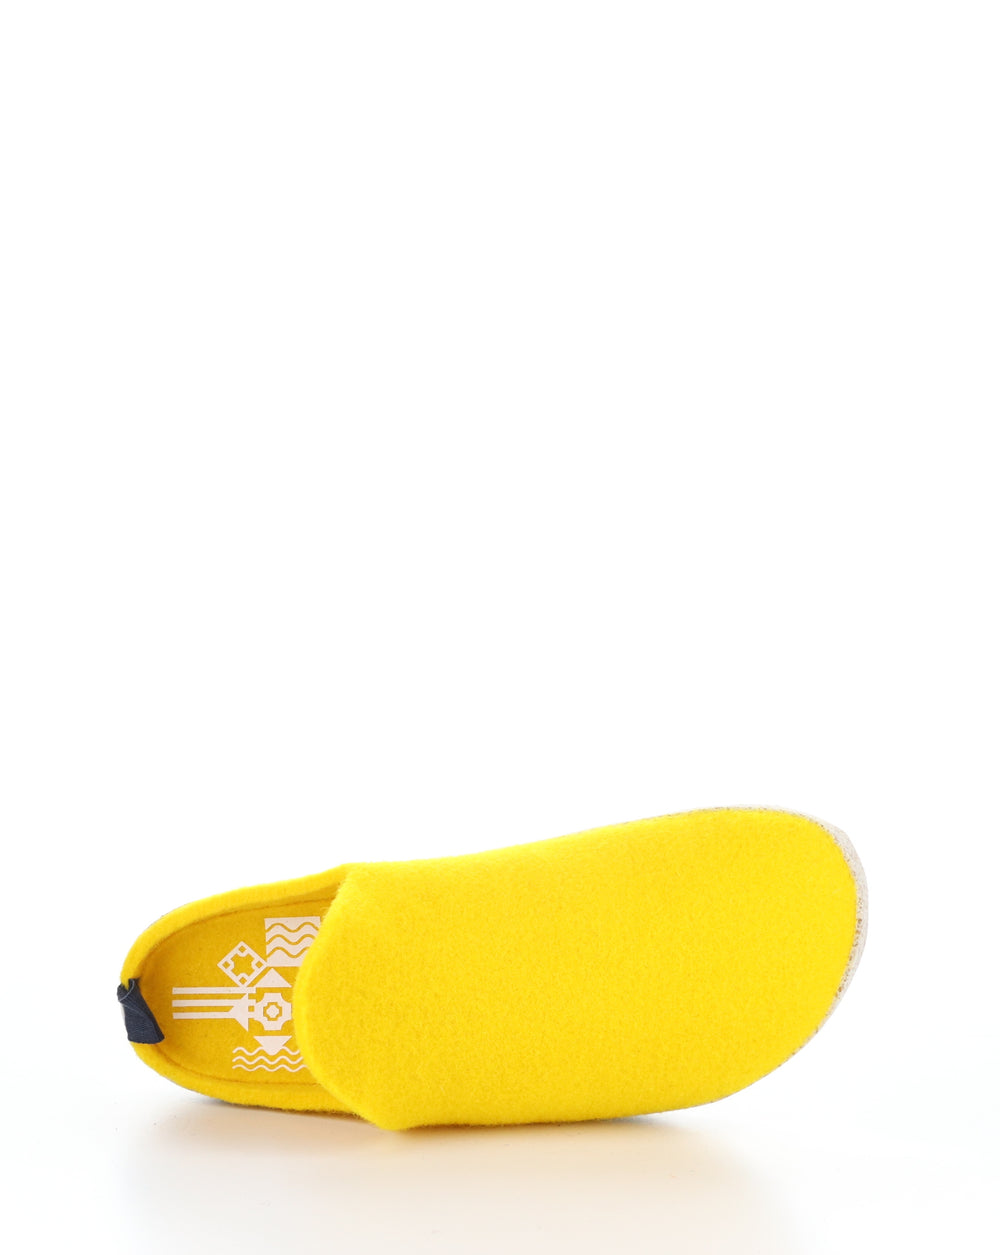 COME023ASP Yellow Slip-on Mules